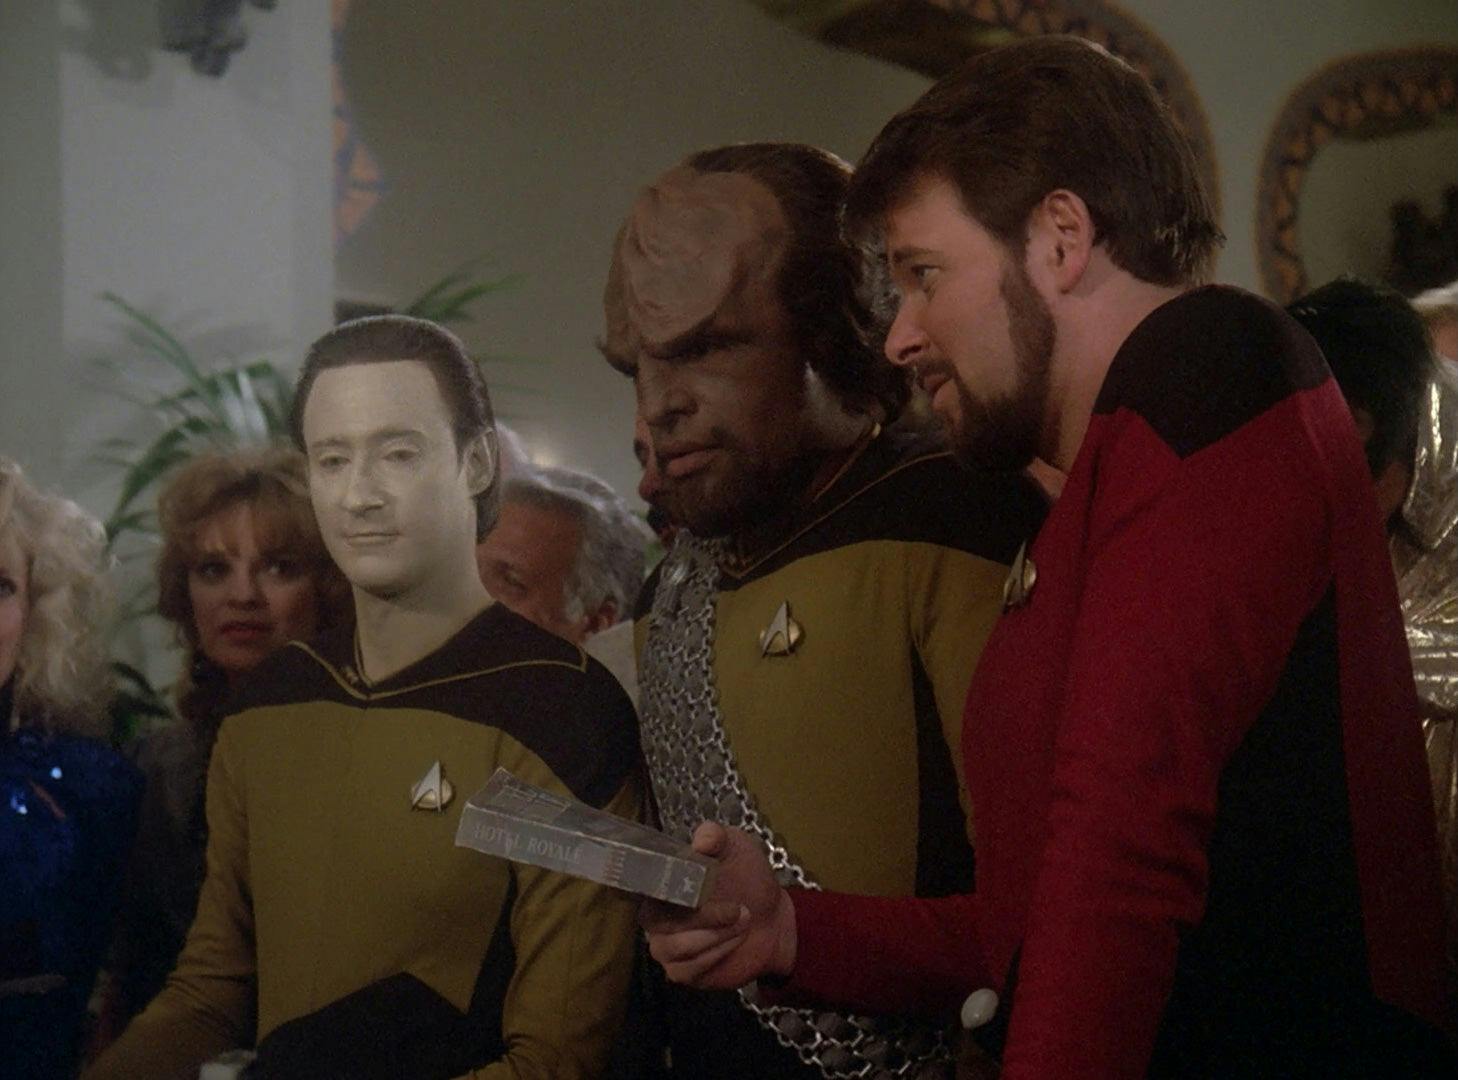 Data, Worf, and Riker hold a dusty copy of the book Hotel Royale.